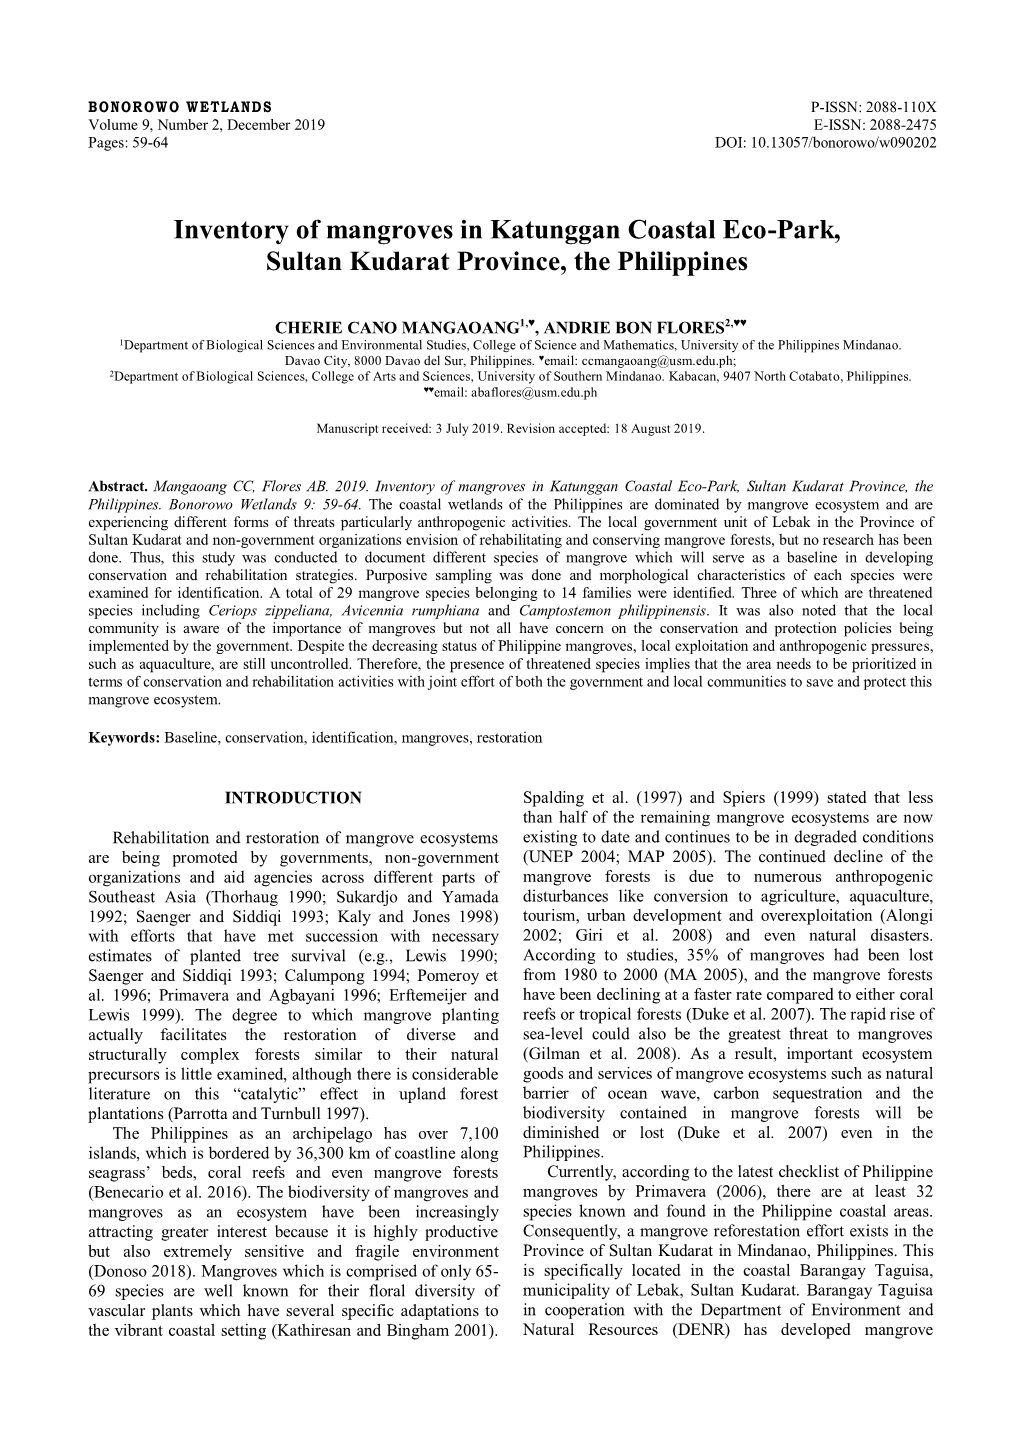 Inventory of Mangroves in Katunggan Coastal Eco-Park, Sultan Kudarat Province, the Philippines